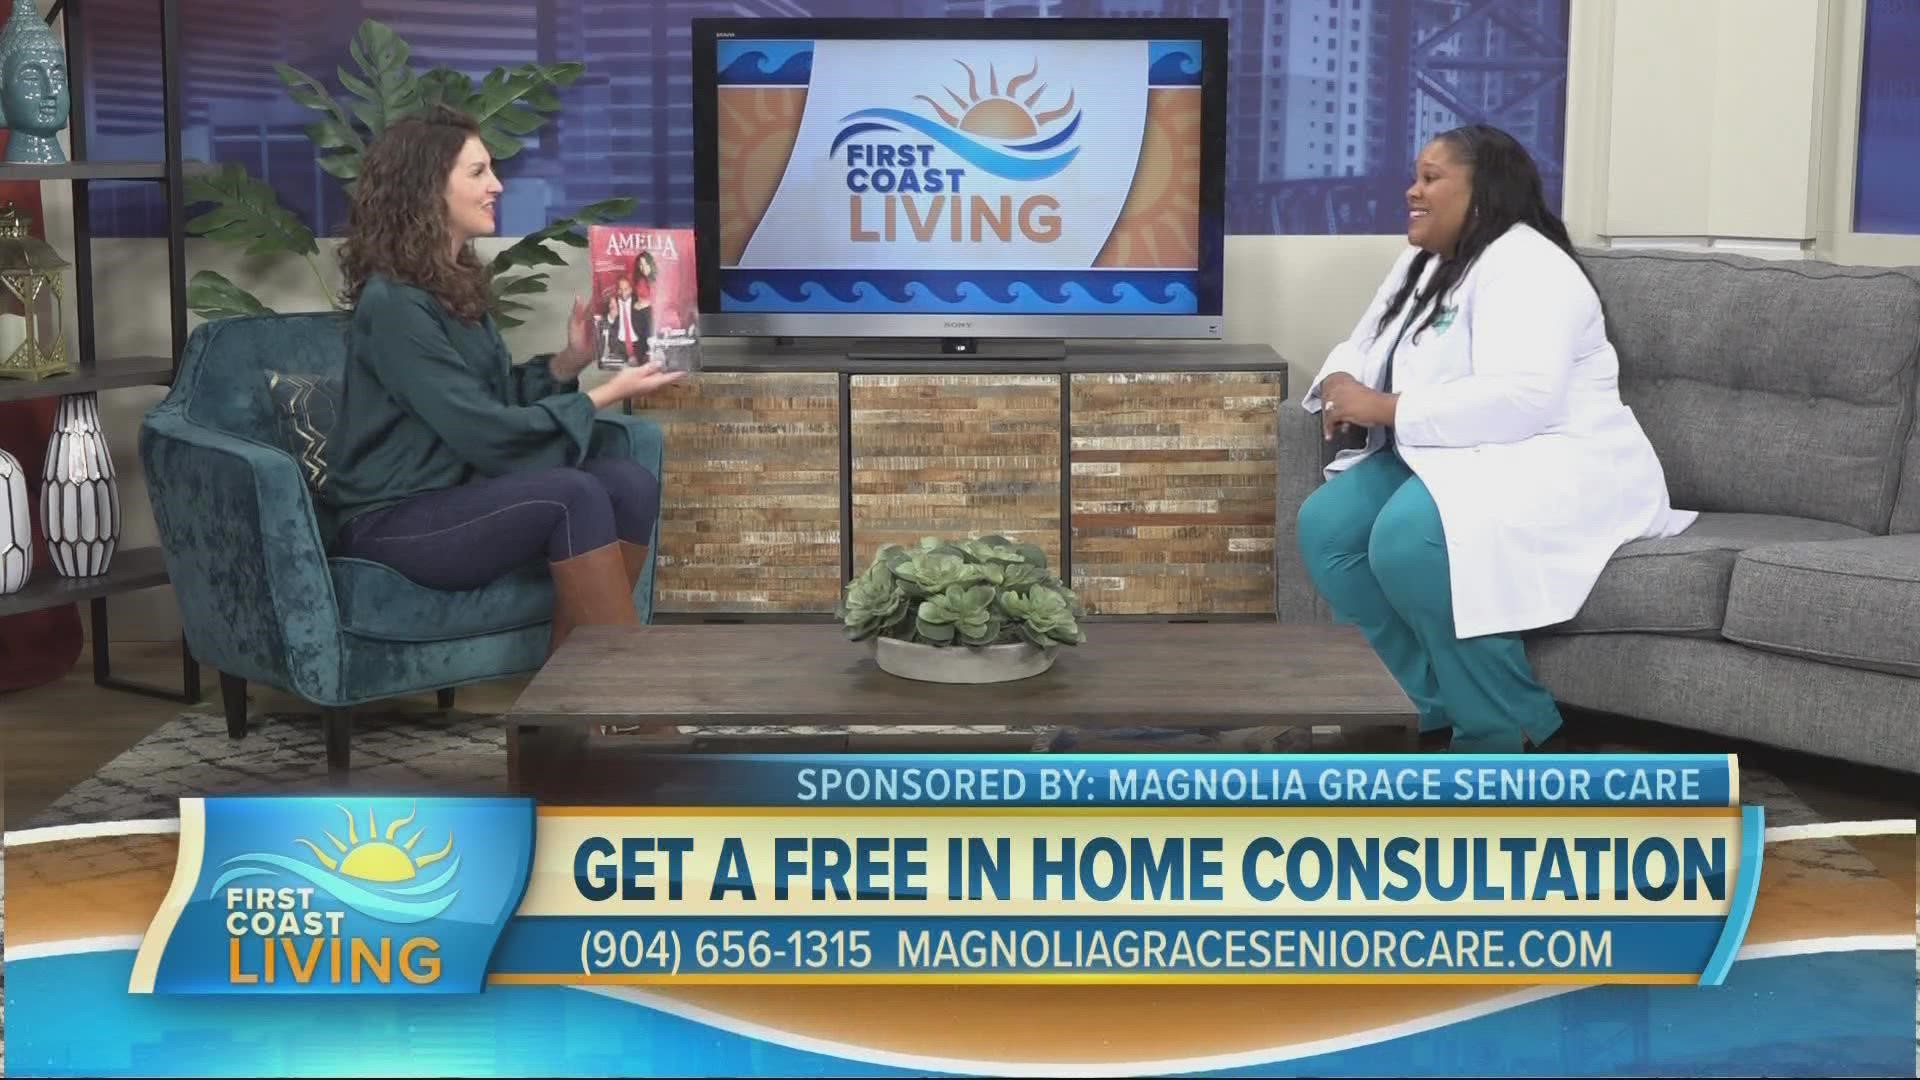 The founder, Nicole Wrice shares her passion for helping others and offers free in-home consultations for those interested in senior care.